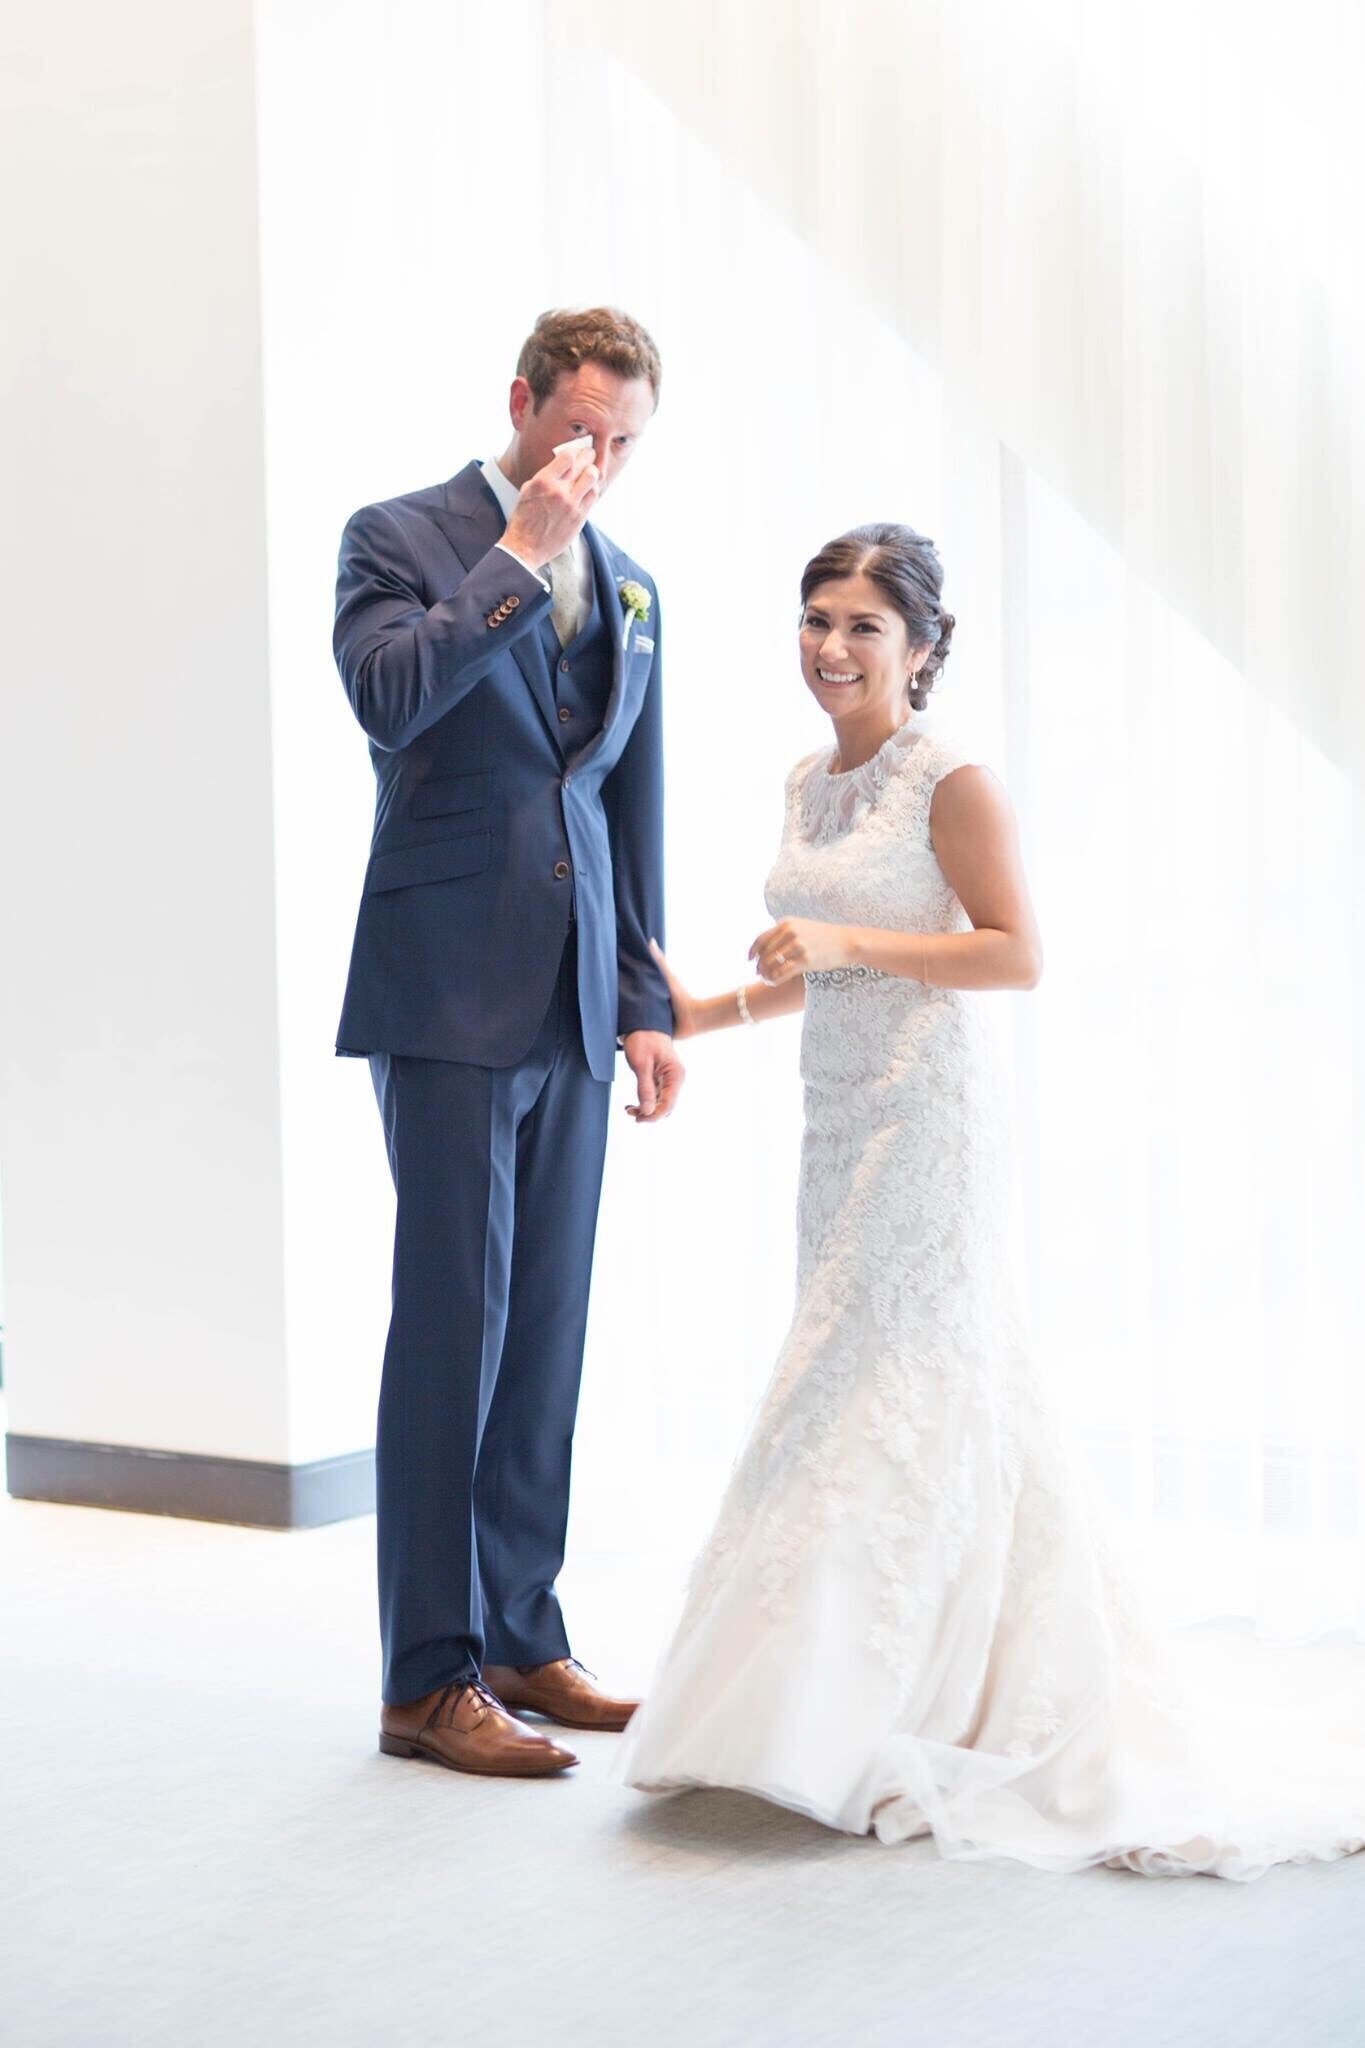 Groom wipes away tears after seeing his beautiful bride for the first time